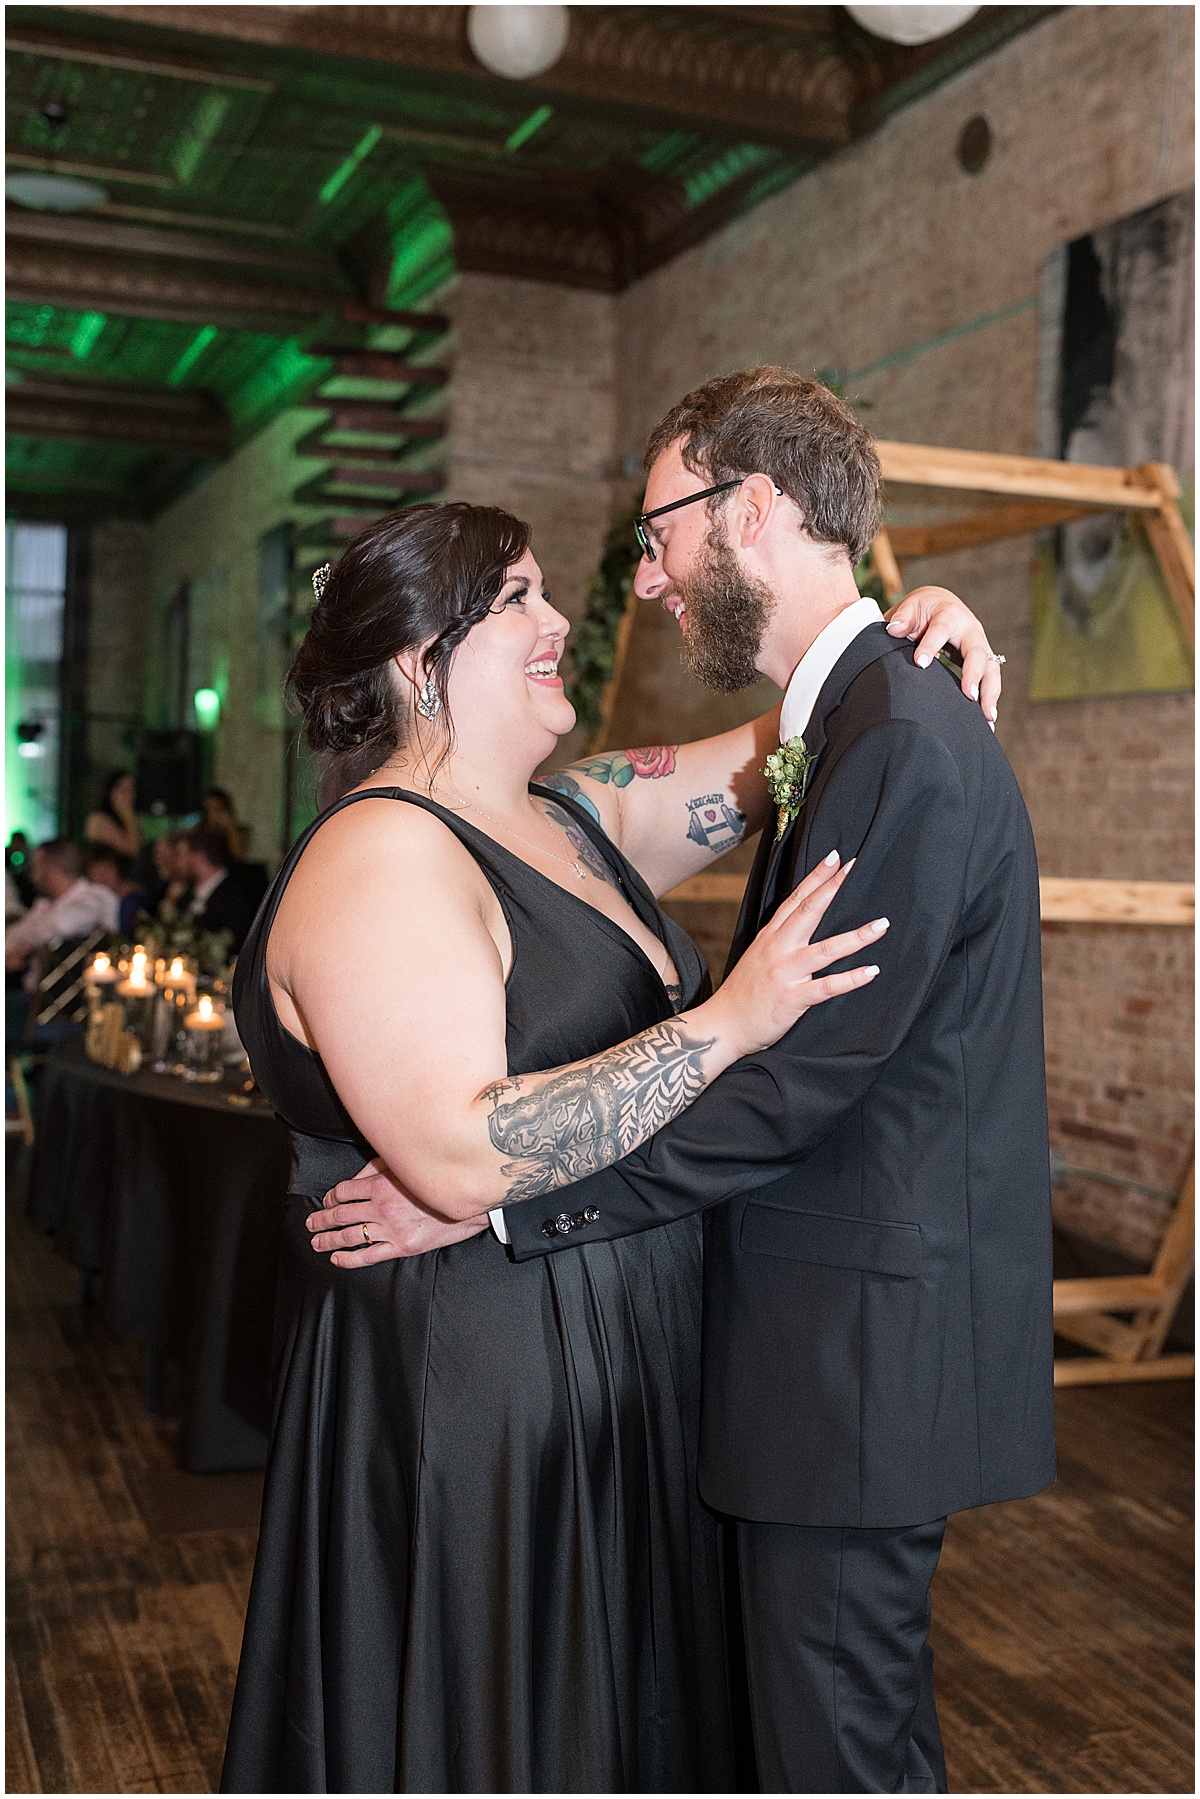 Bride and groom first dance during eMbers Venue wedding reception